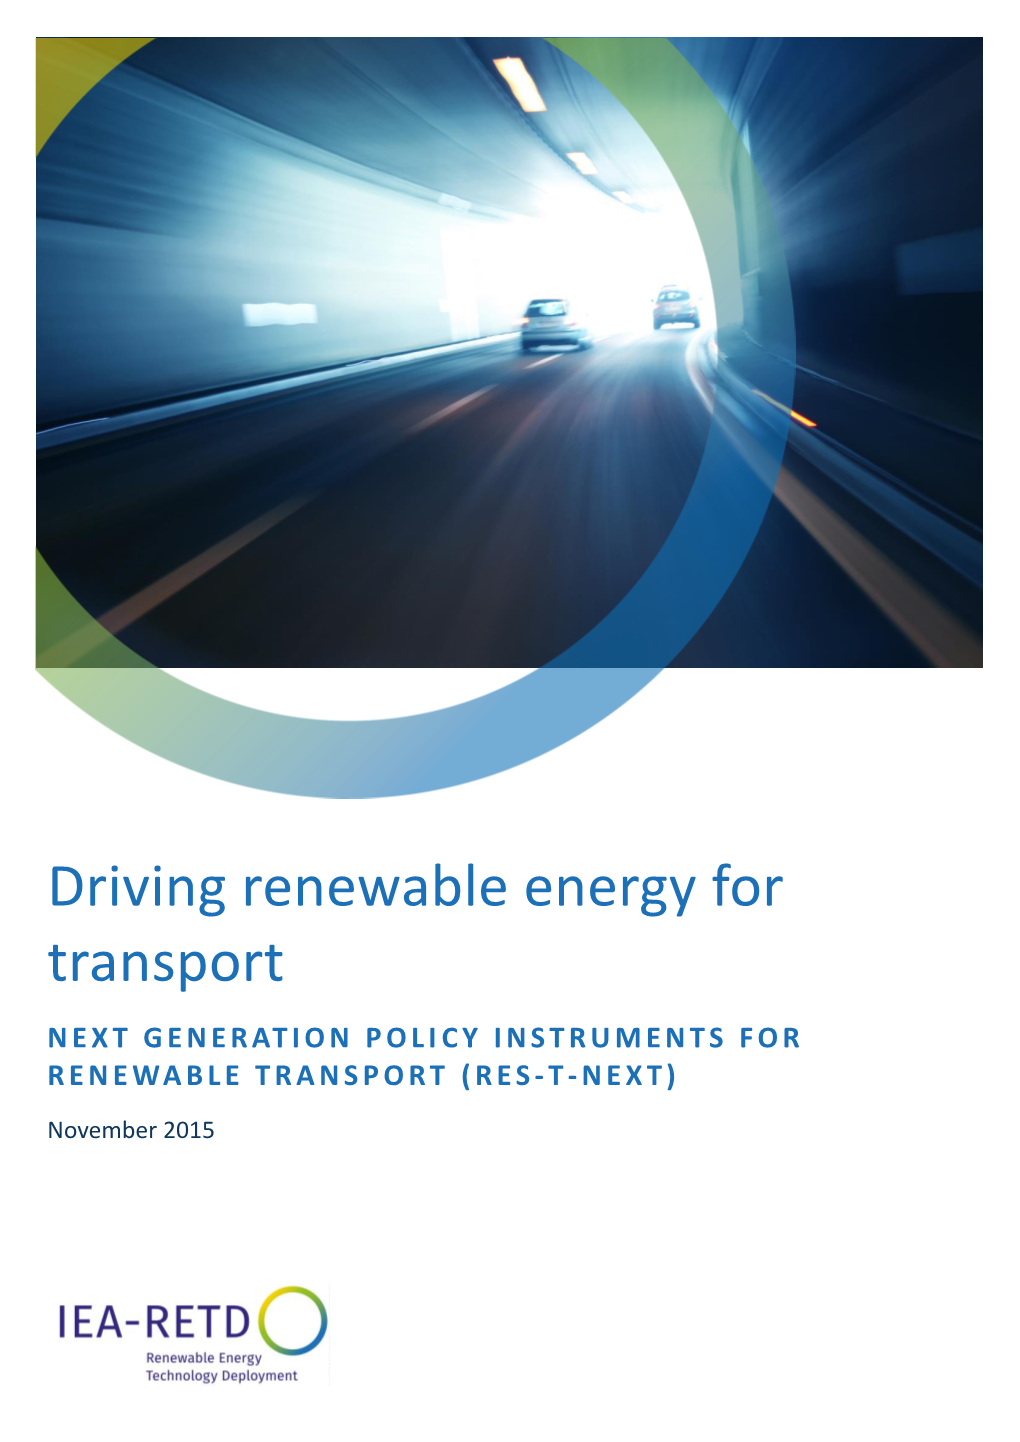 Driving Renewable Energy for Transport NEXT GENERATION POLI CY INSTRUMENTS for RENEWABLE TRANSPORT (RES - T - NEXT)